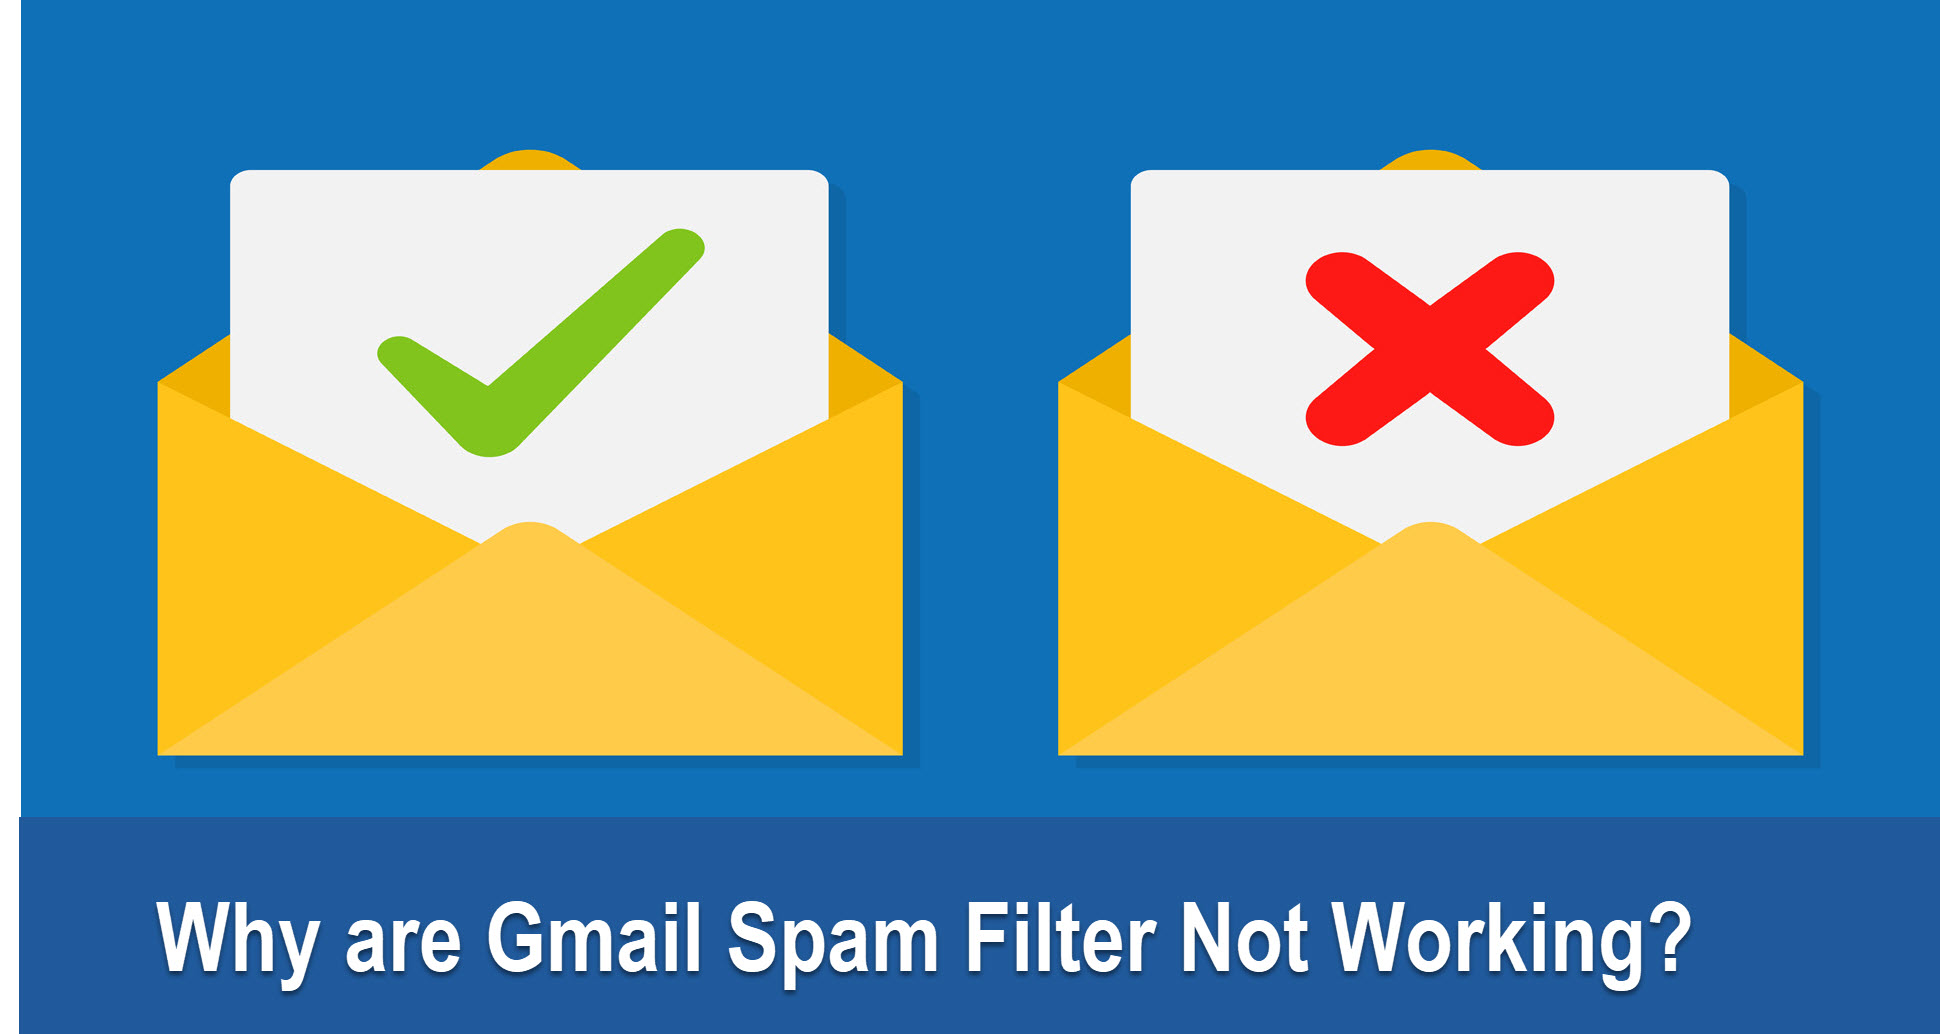 Why are Gmail Spam Filter Not Working?